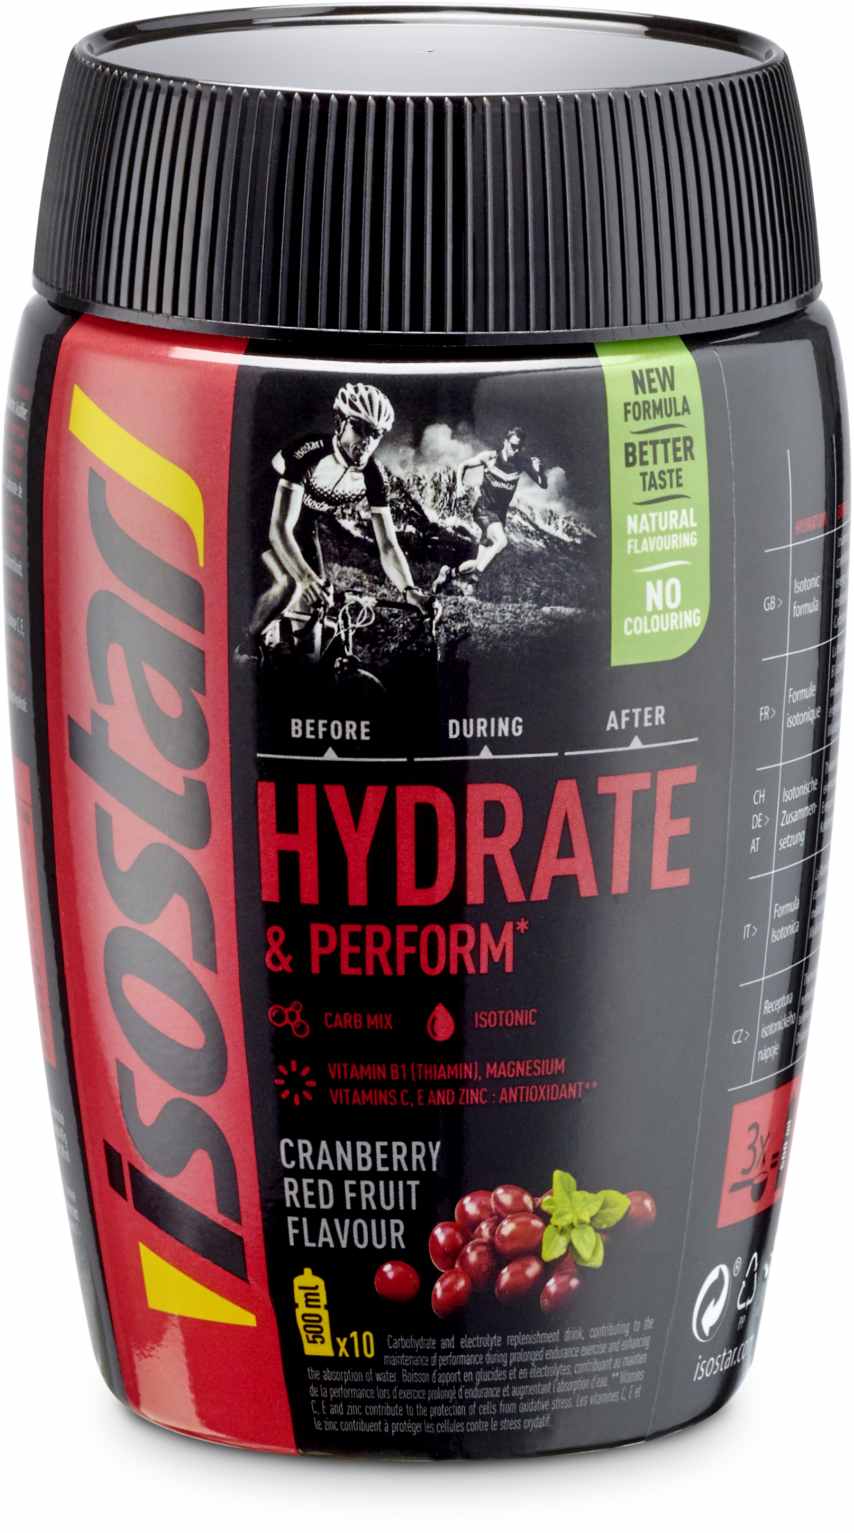 HYDRATE PERFORM CRANBERRY400G - Isotonic drink